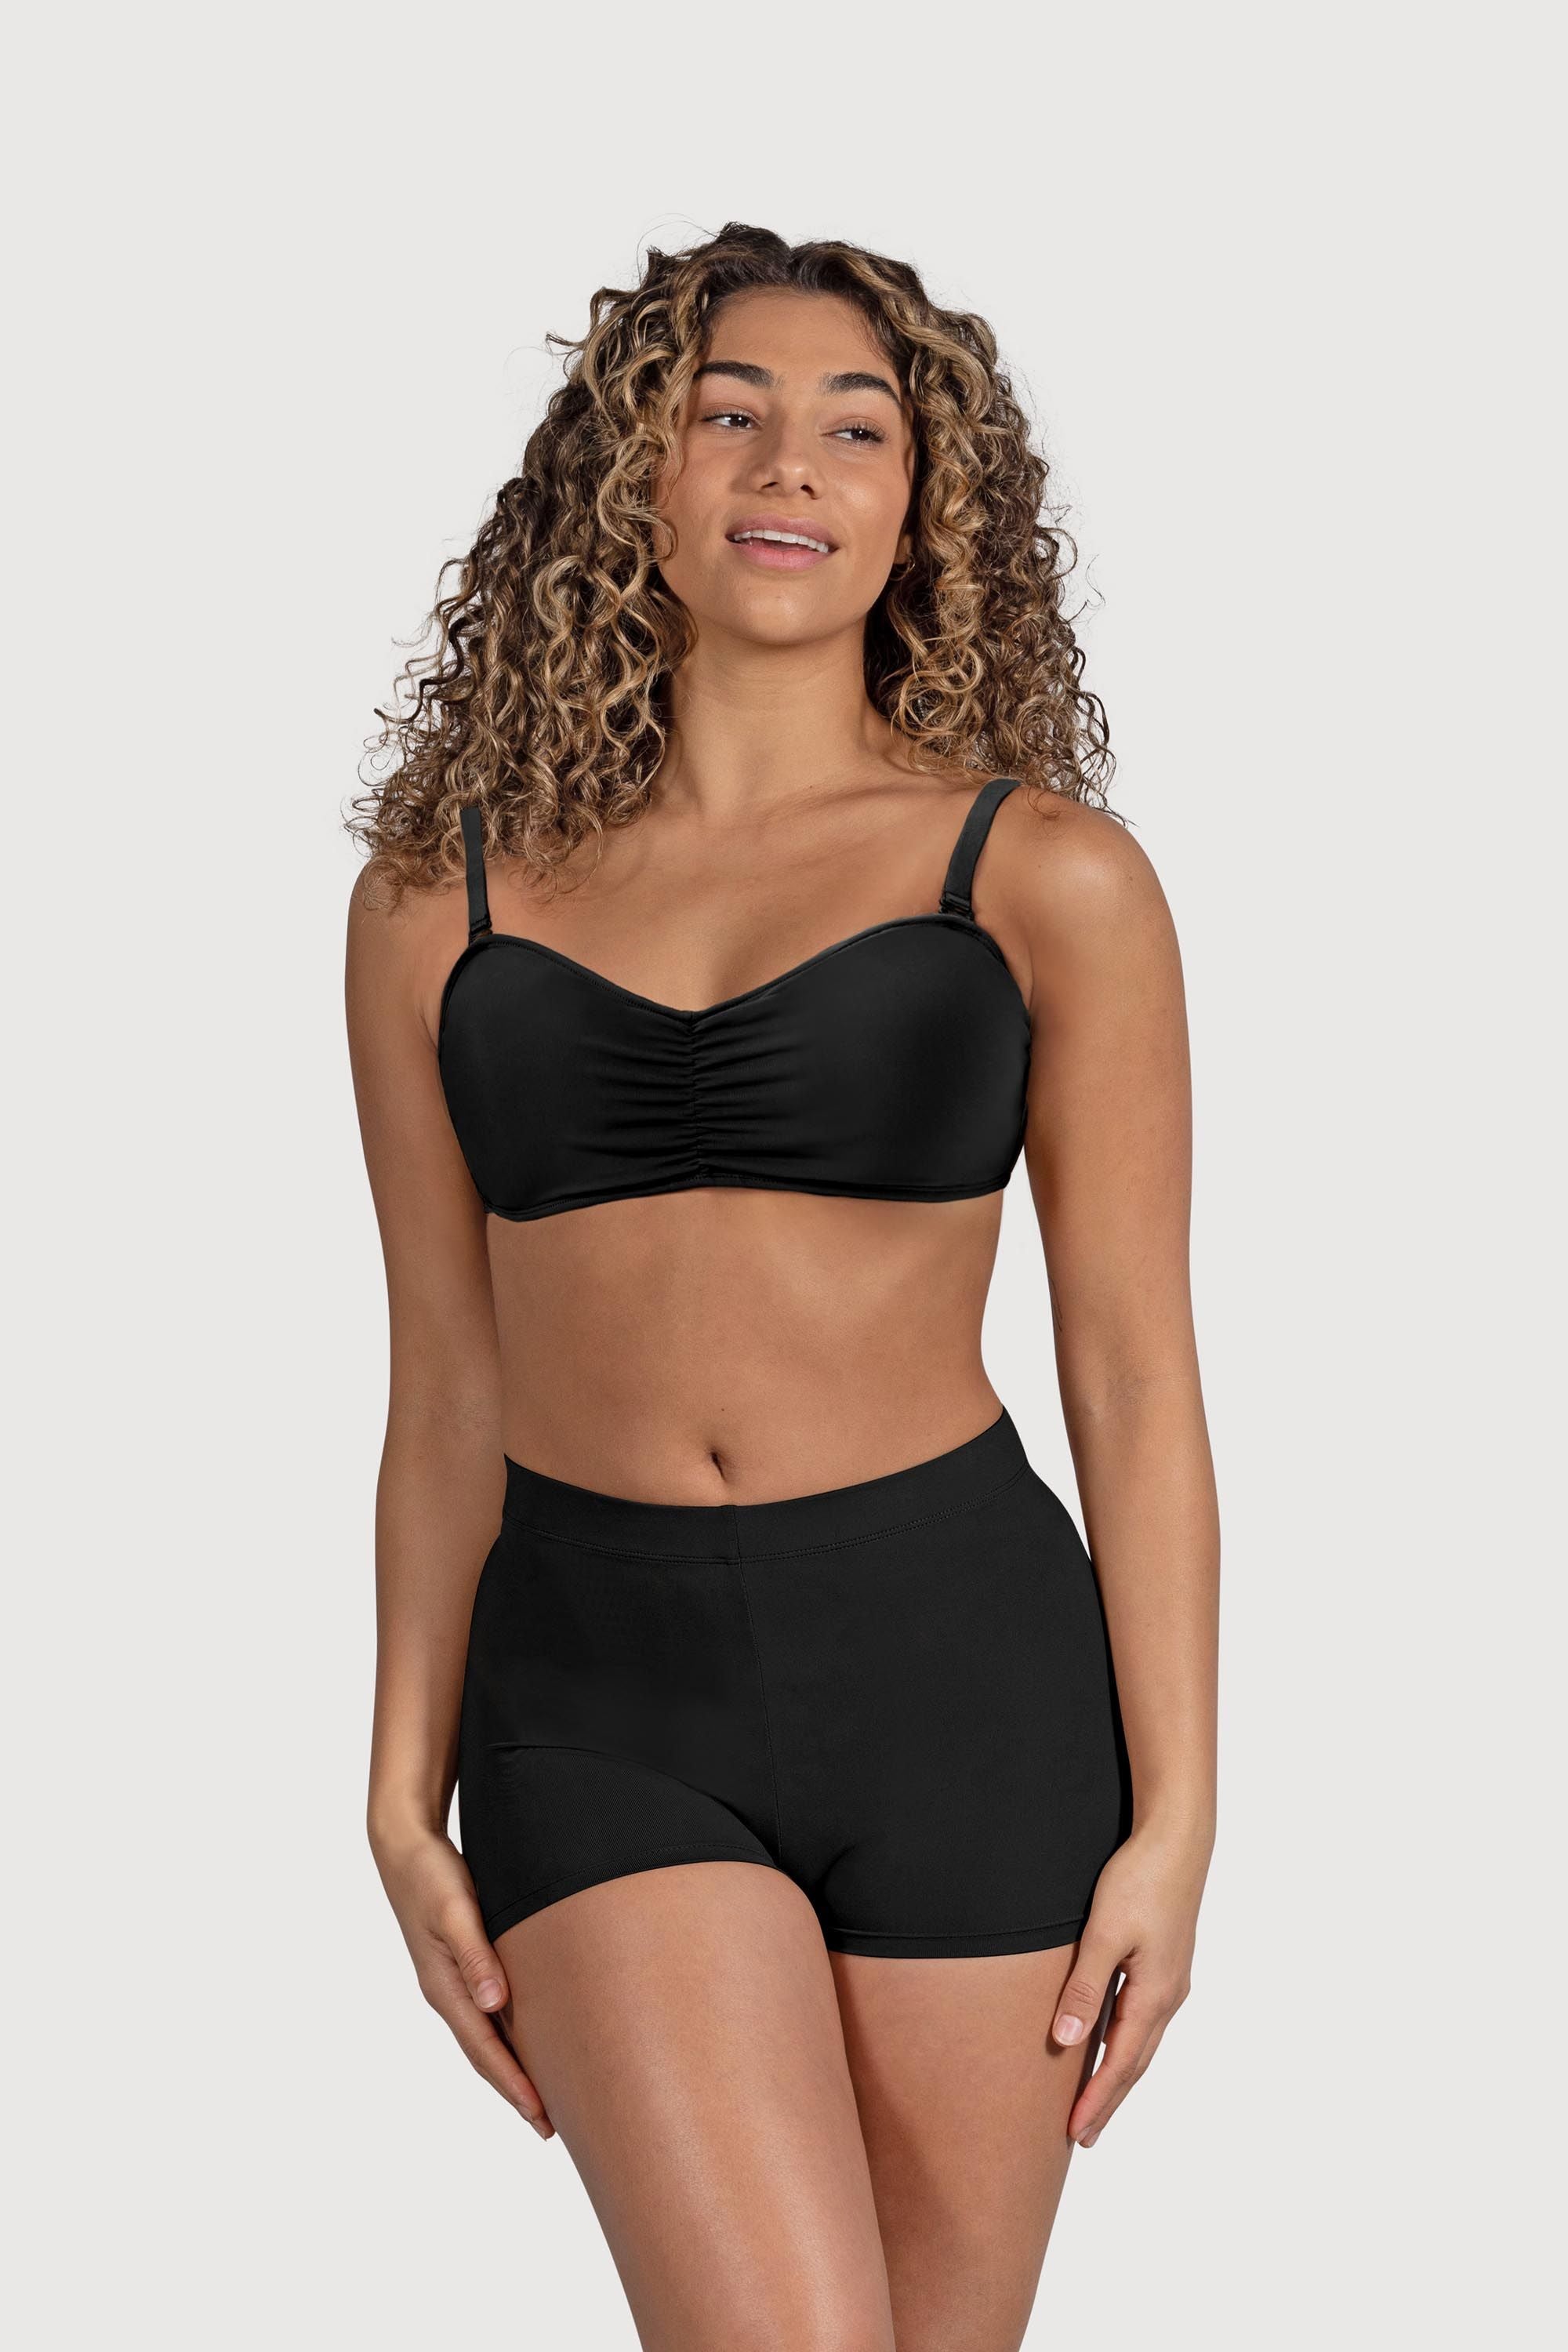 Small band, big cup size help: Trying dancewear!